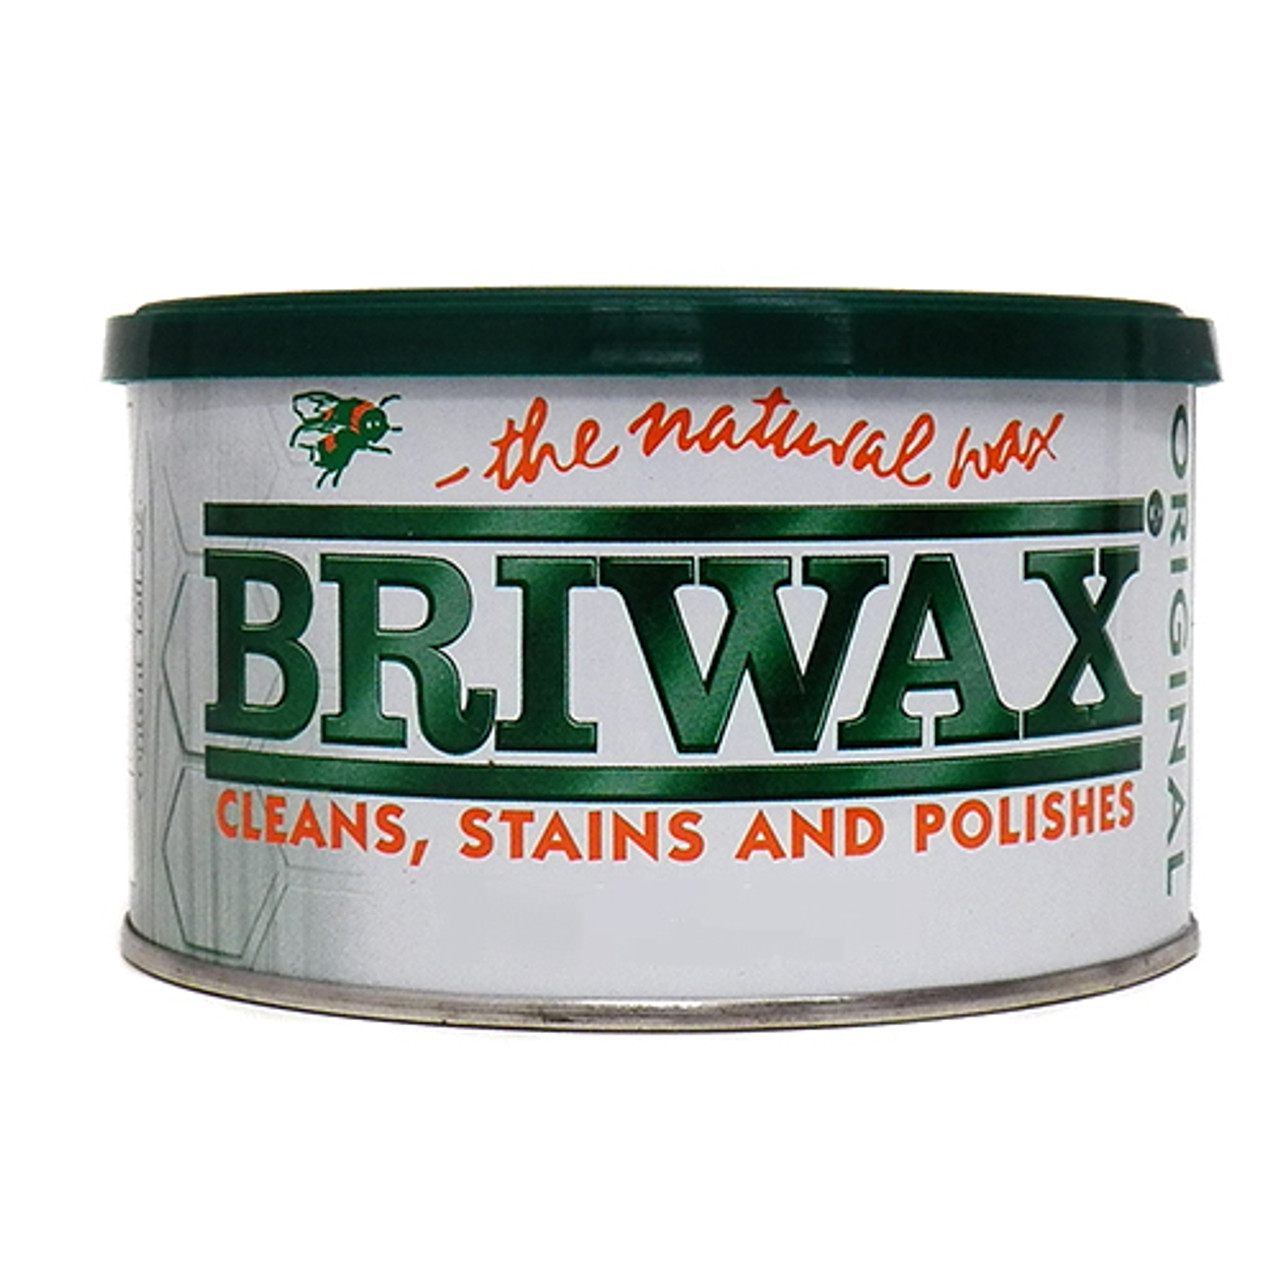 Briwax Original Wax Polish 4-Pack (4 x 1lb) - Pick any 4 to customize -  Hard To Get Items